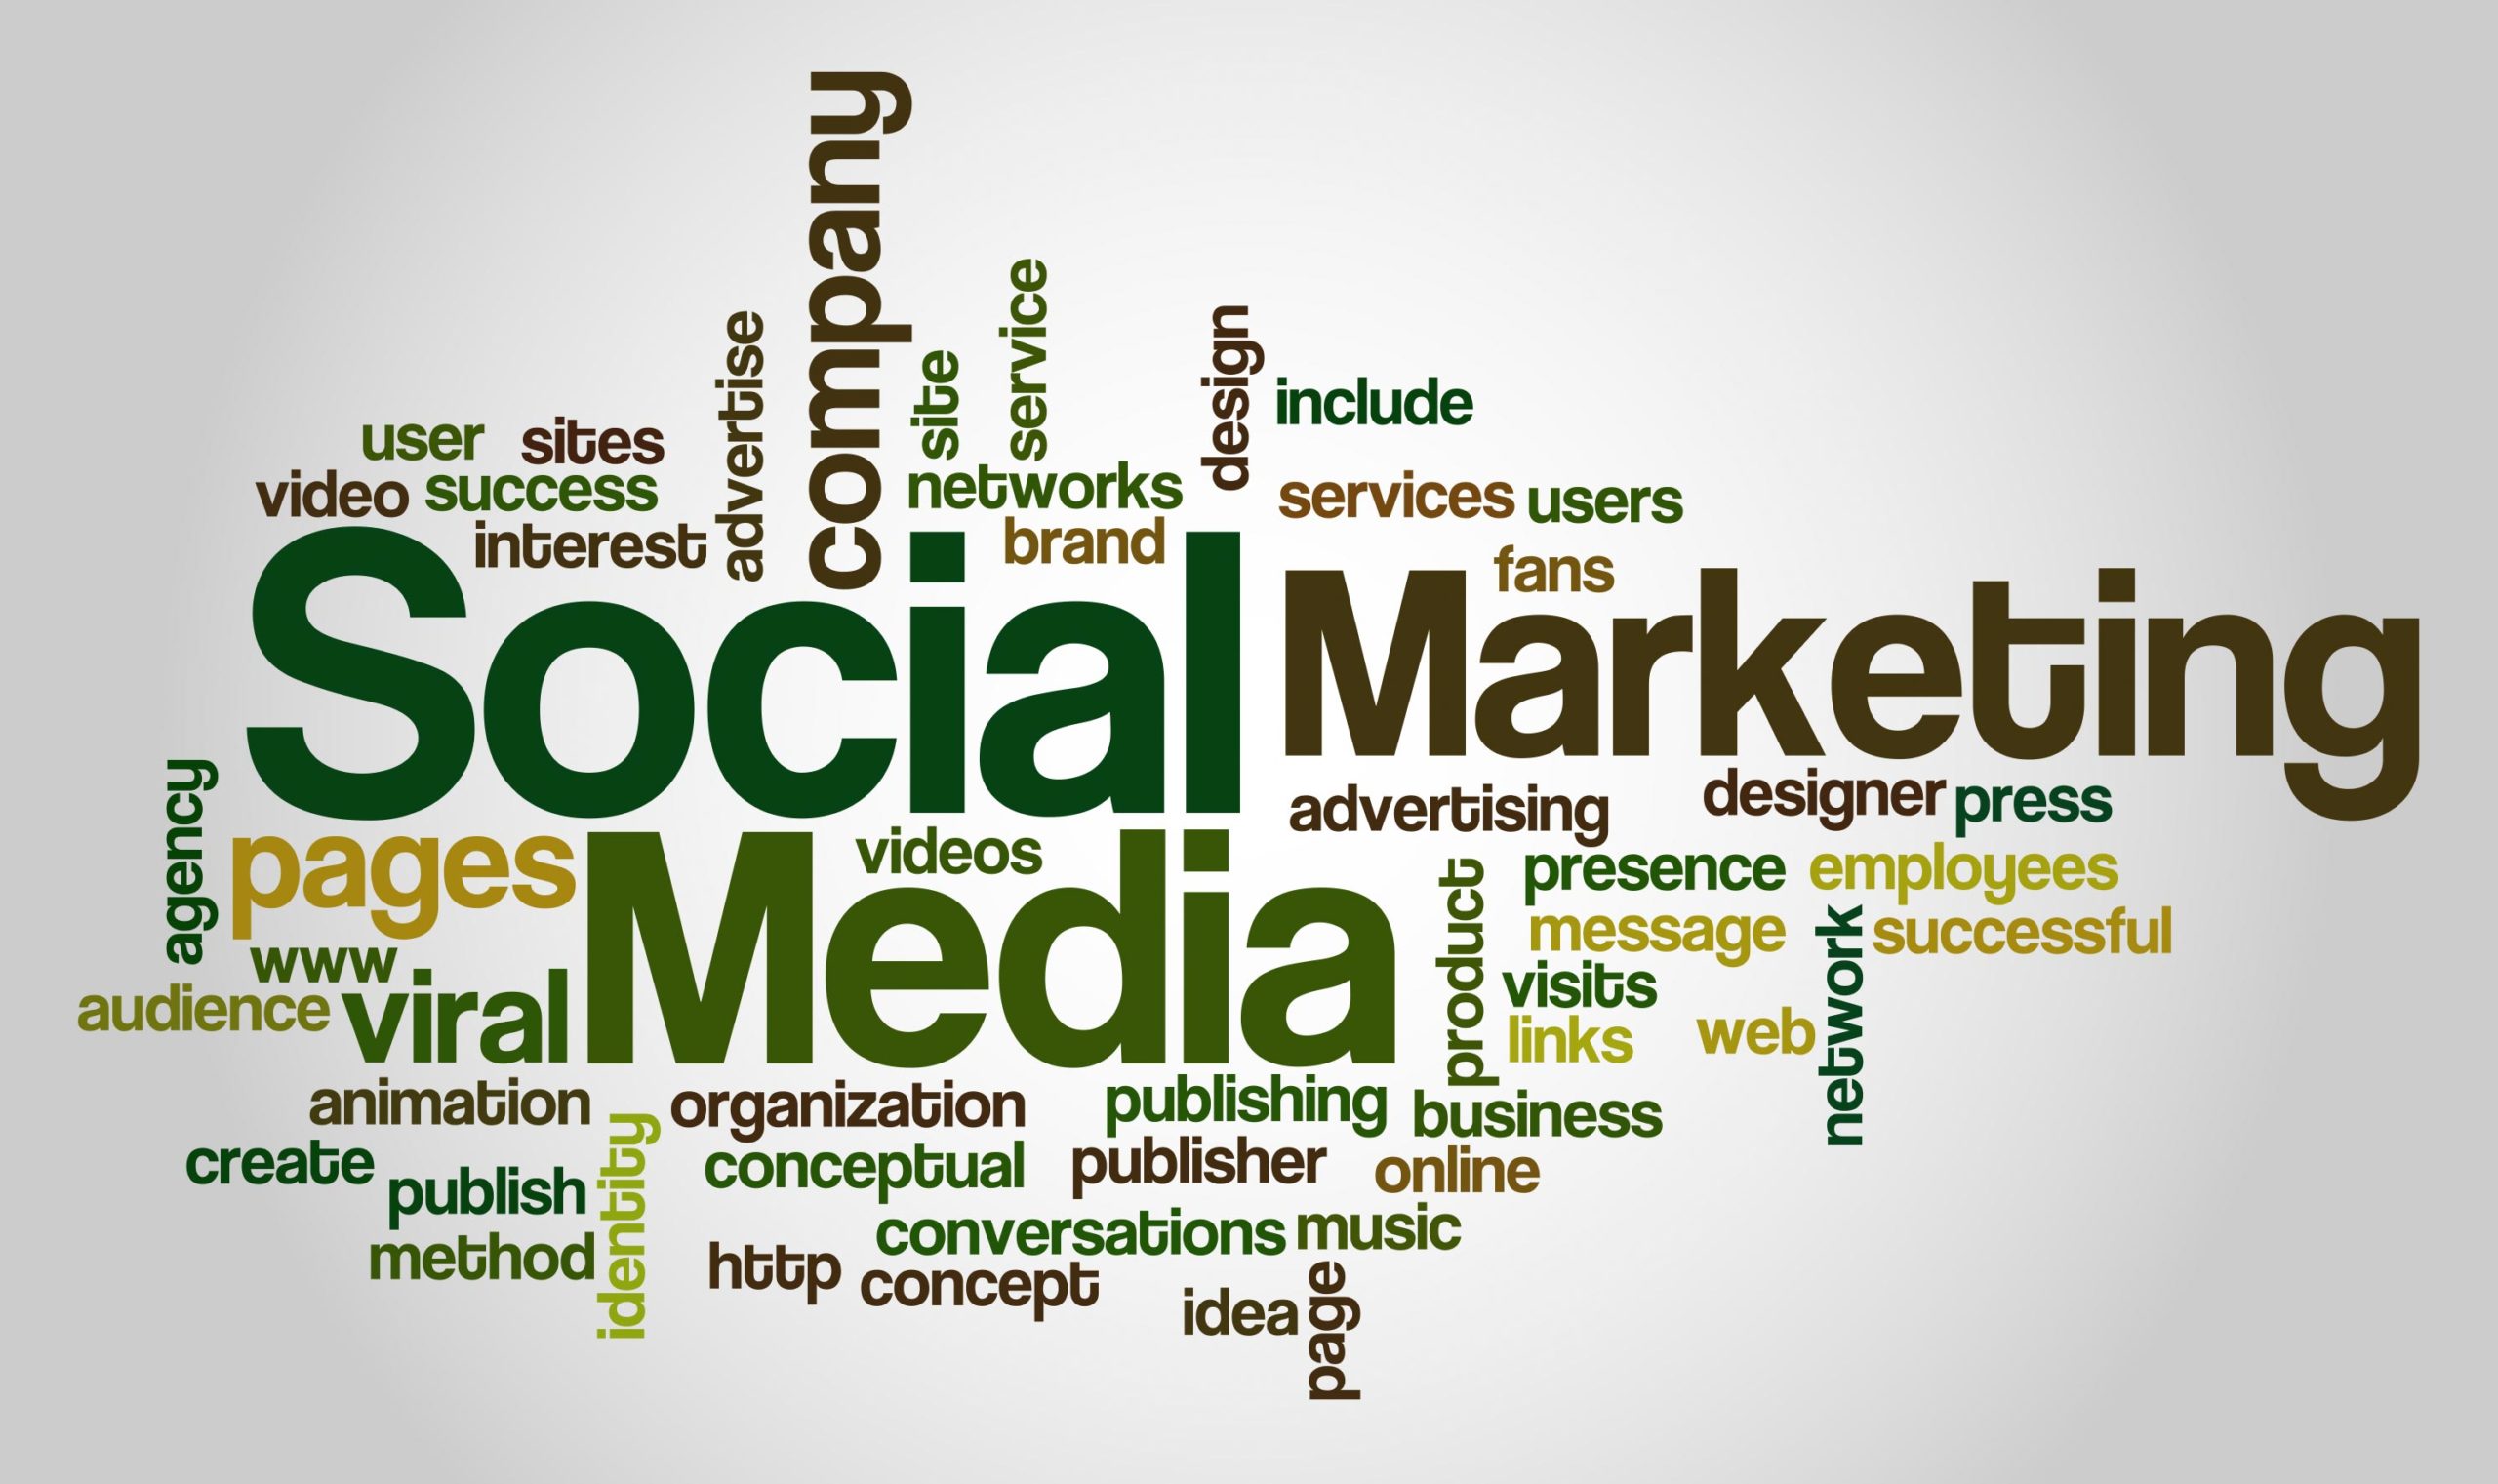 Using Social Media Marketing to Your Advantage: Tips and Tricks